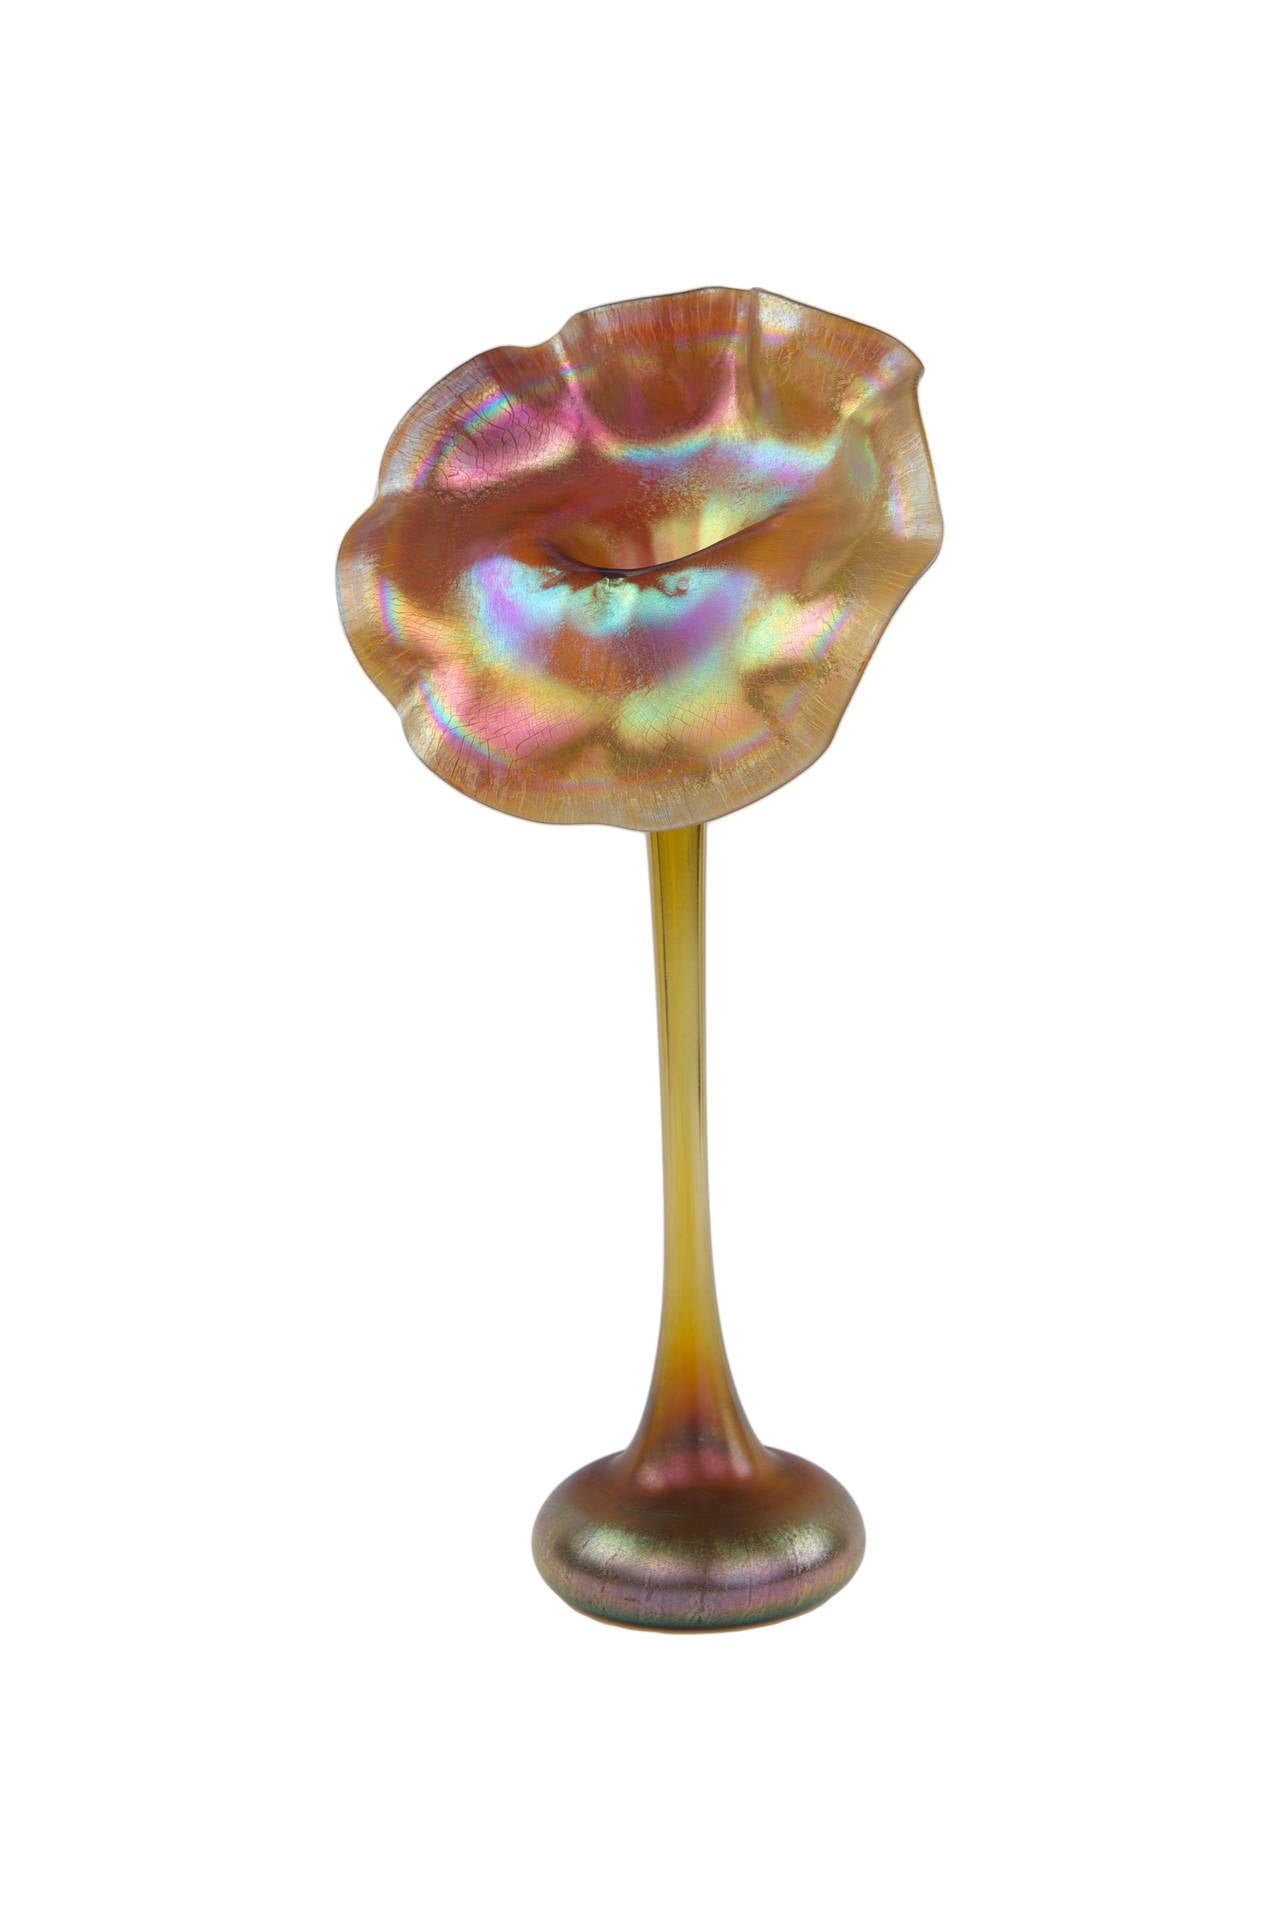 An exceptional American Art Nouveau “Jack-in-the-Pulpit” vase by Tiffany Studios decorated with a large organic opening fully iridized gold, shaded to purple or pink and edged in the curved areas with light tones. The edges of the opening is further